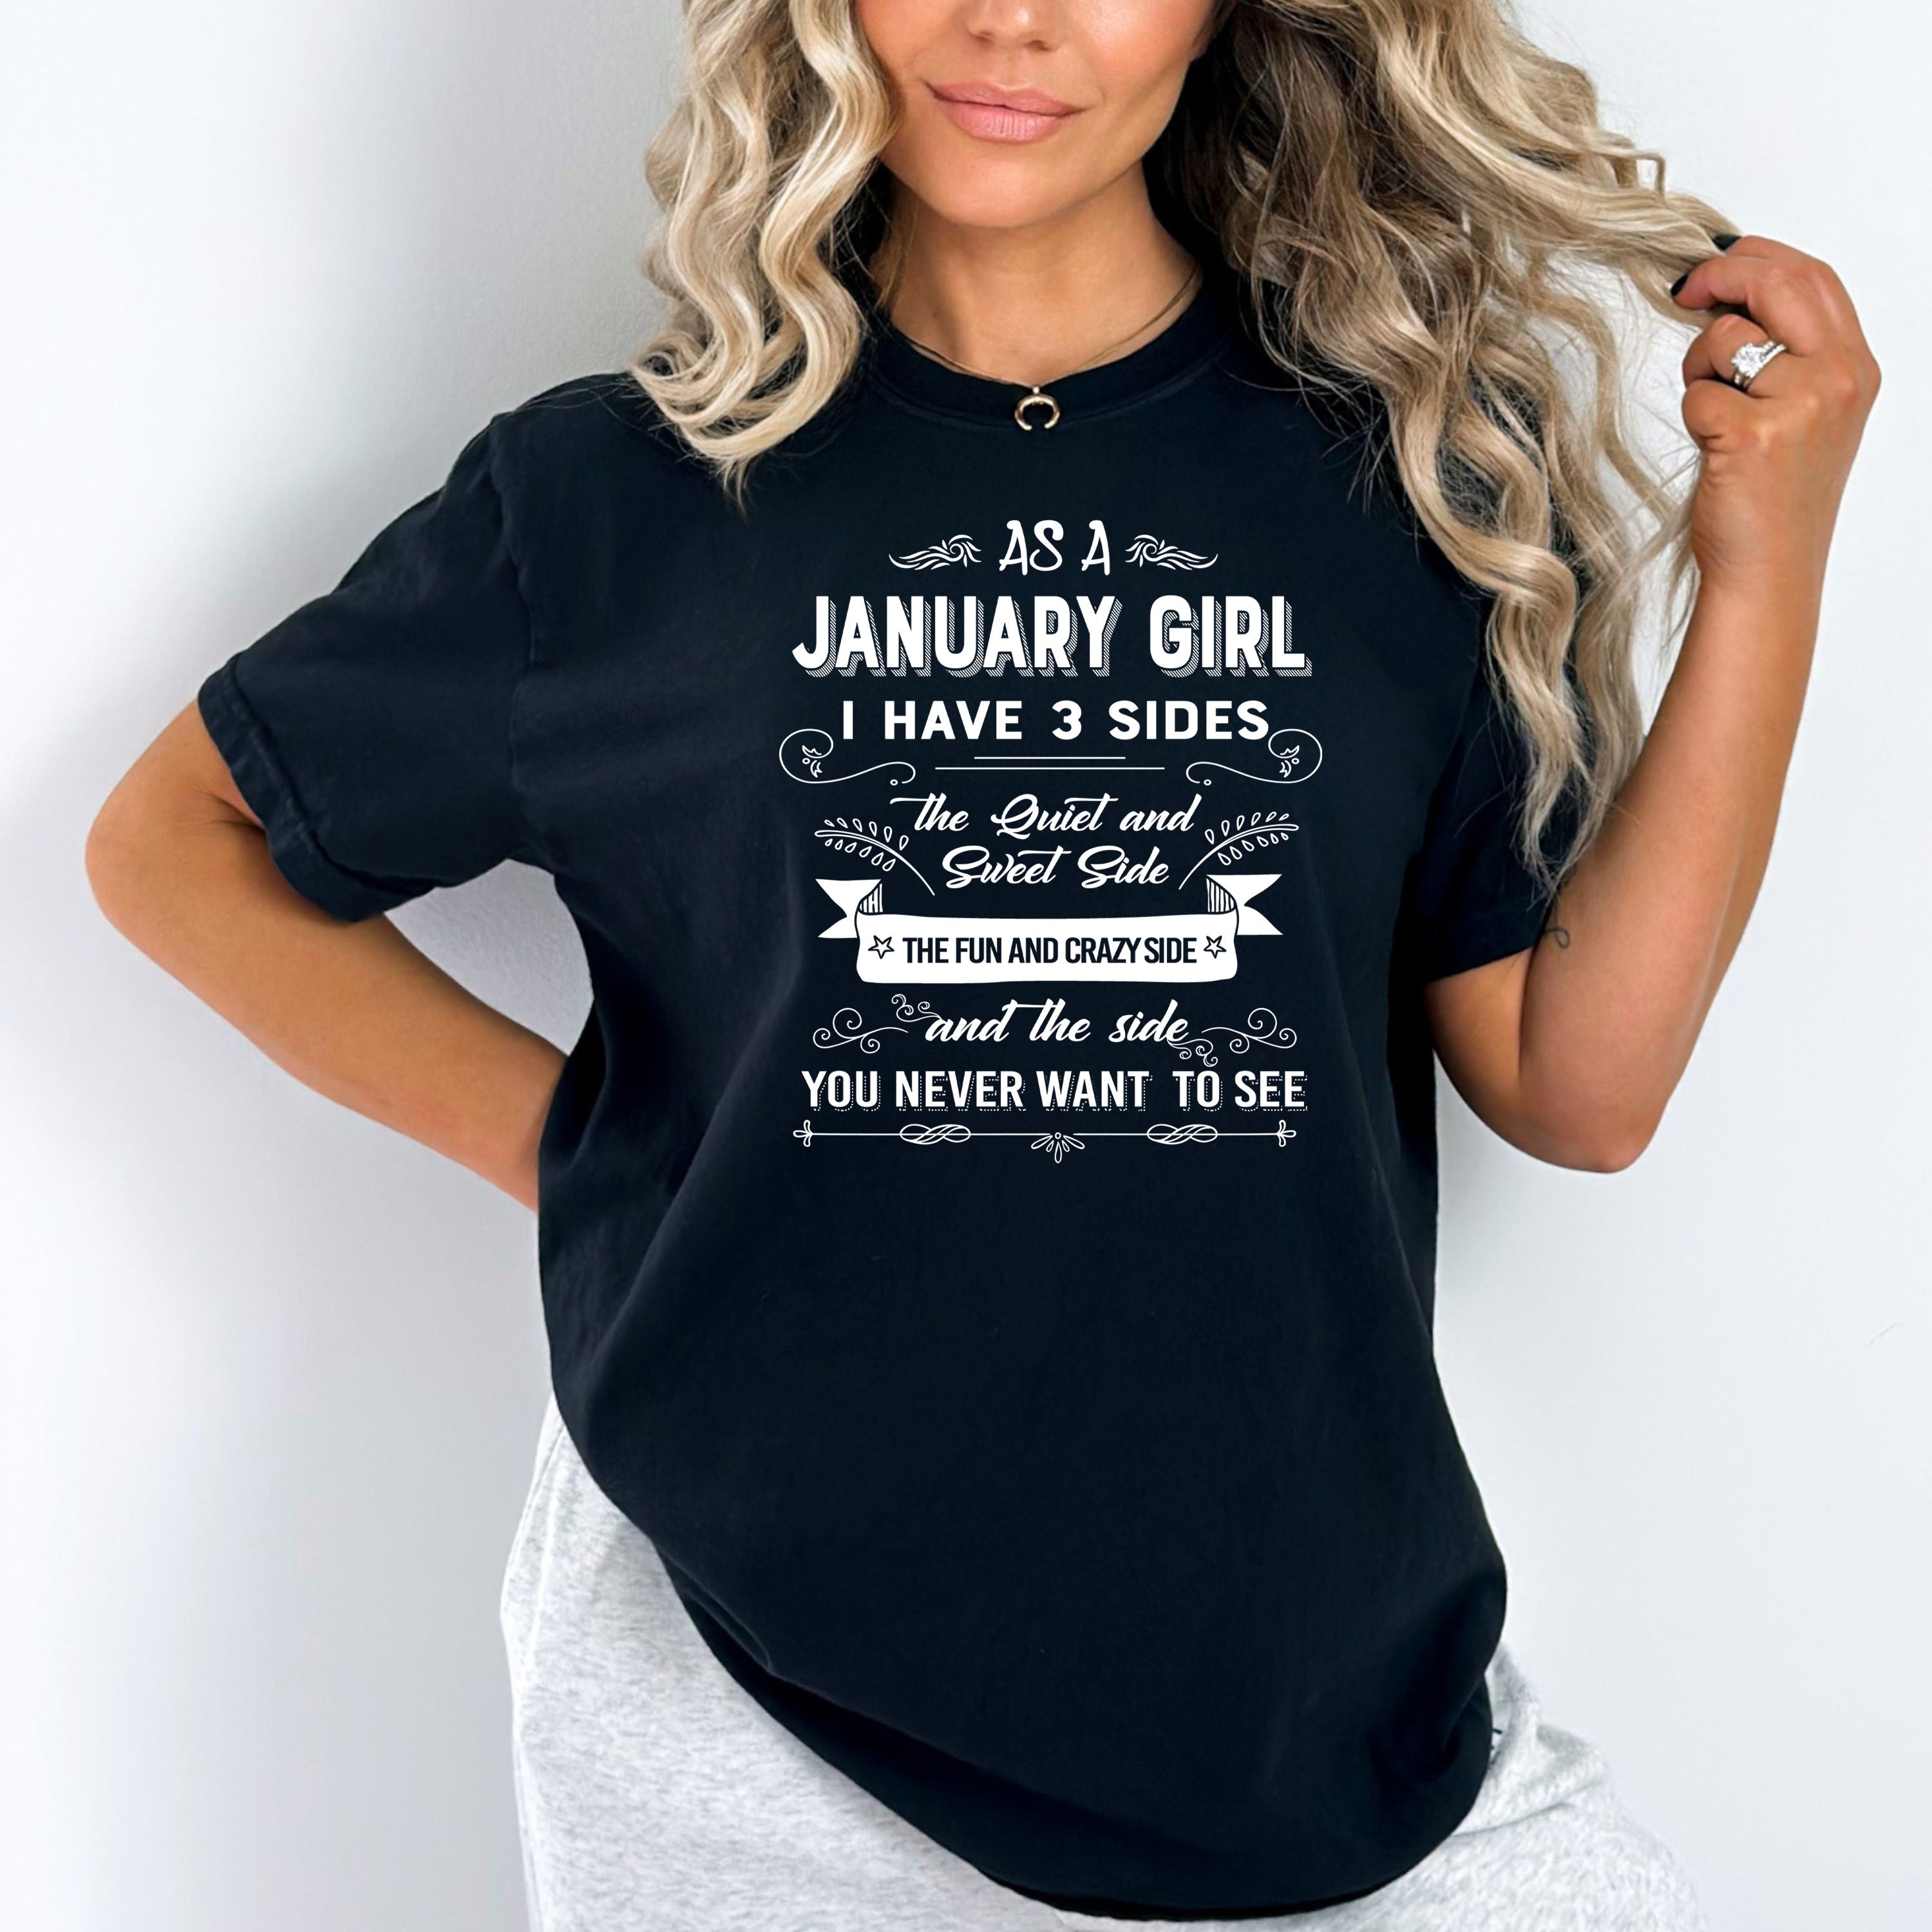 As A January Girl I Have 3 Sides- Bella Canvas Super Soft Cotton - Few Left.